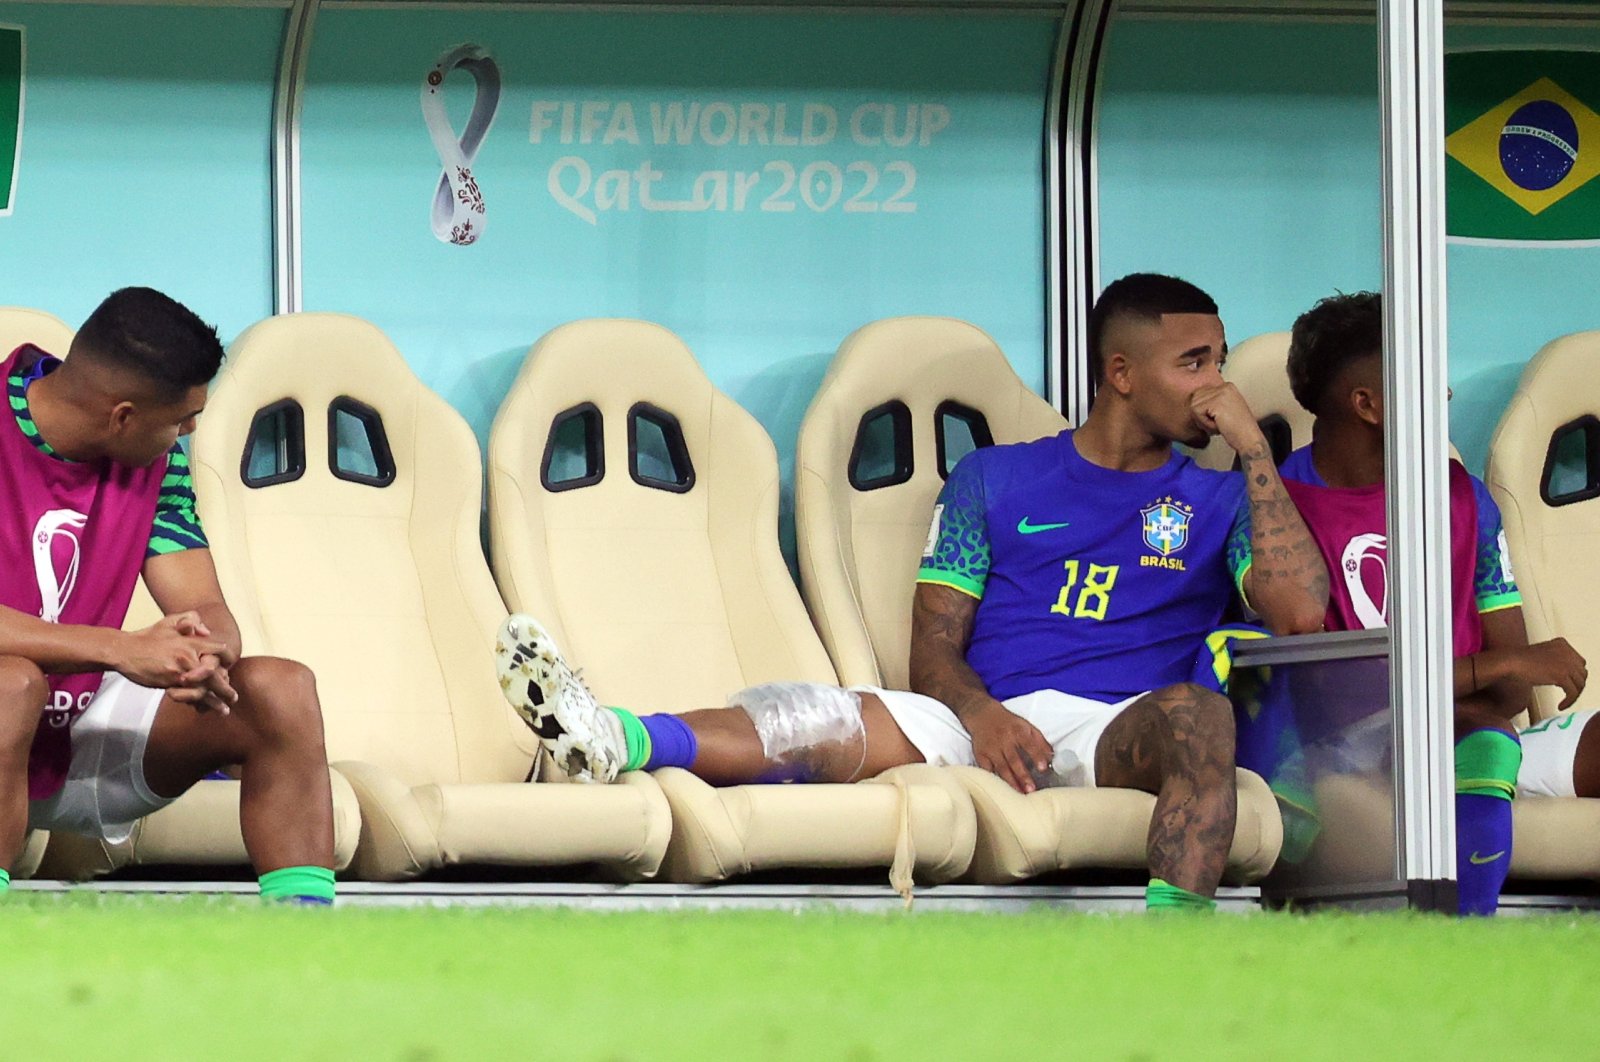 Casemiro (L) of Brazil looks at the leg of his teammate Gabriel Jesus (C) during the FIFA World Cup 2022 Group G football match between Cameroon and Brazil at Lusail Stadium, Lusail, Qatar, Dec. 2, 2022. (EPA Photo)